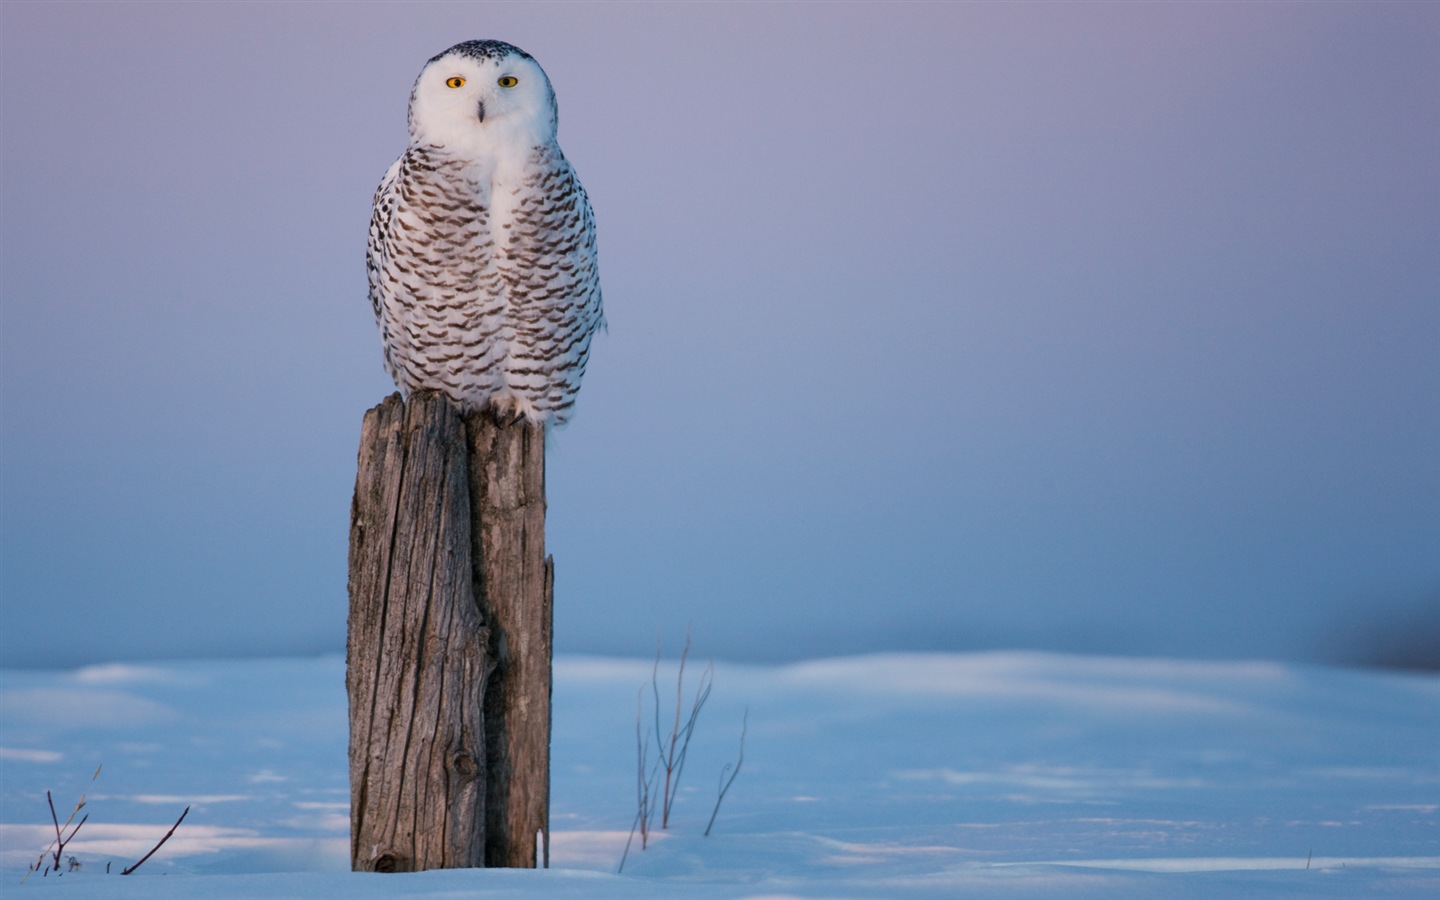 Windows 8 Wallpapers: Arctic, the nature ecological landscape, arctic animals #2 - 1440x900